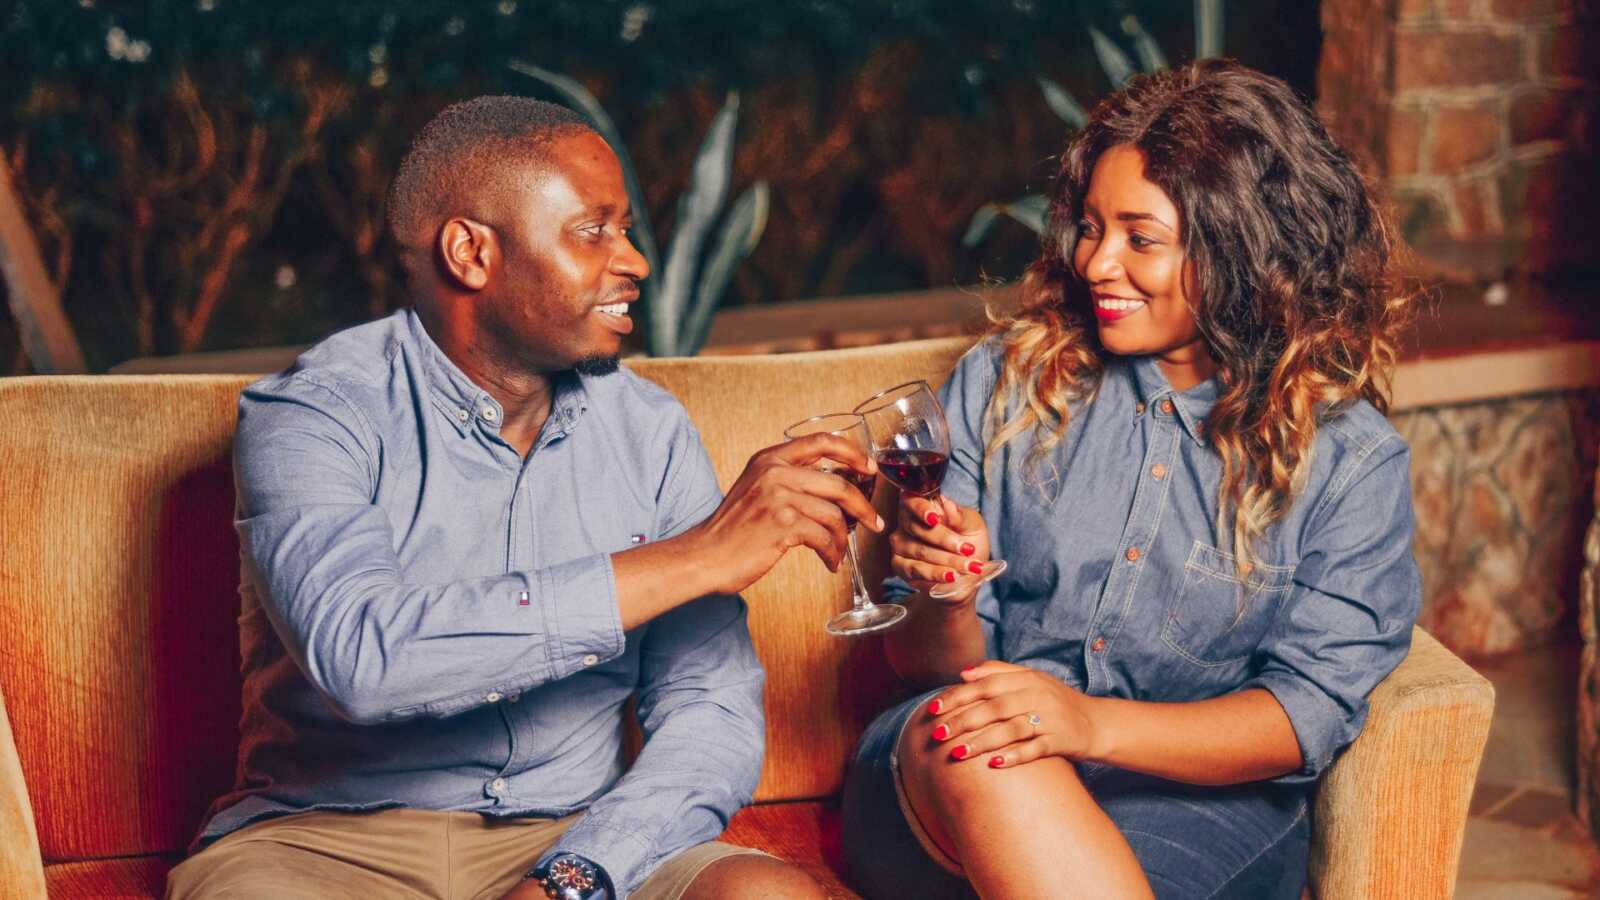 a man and woman sit together on a couch and cheers with glasses of red wine